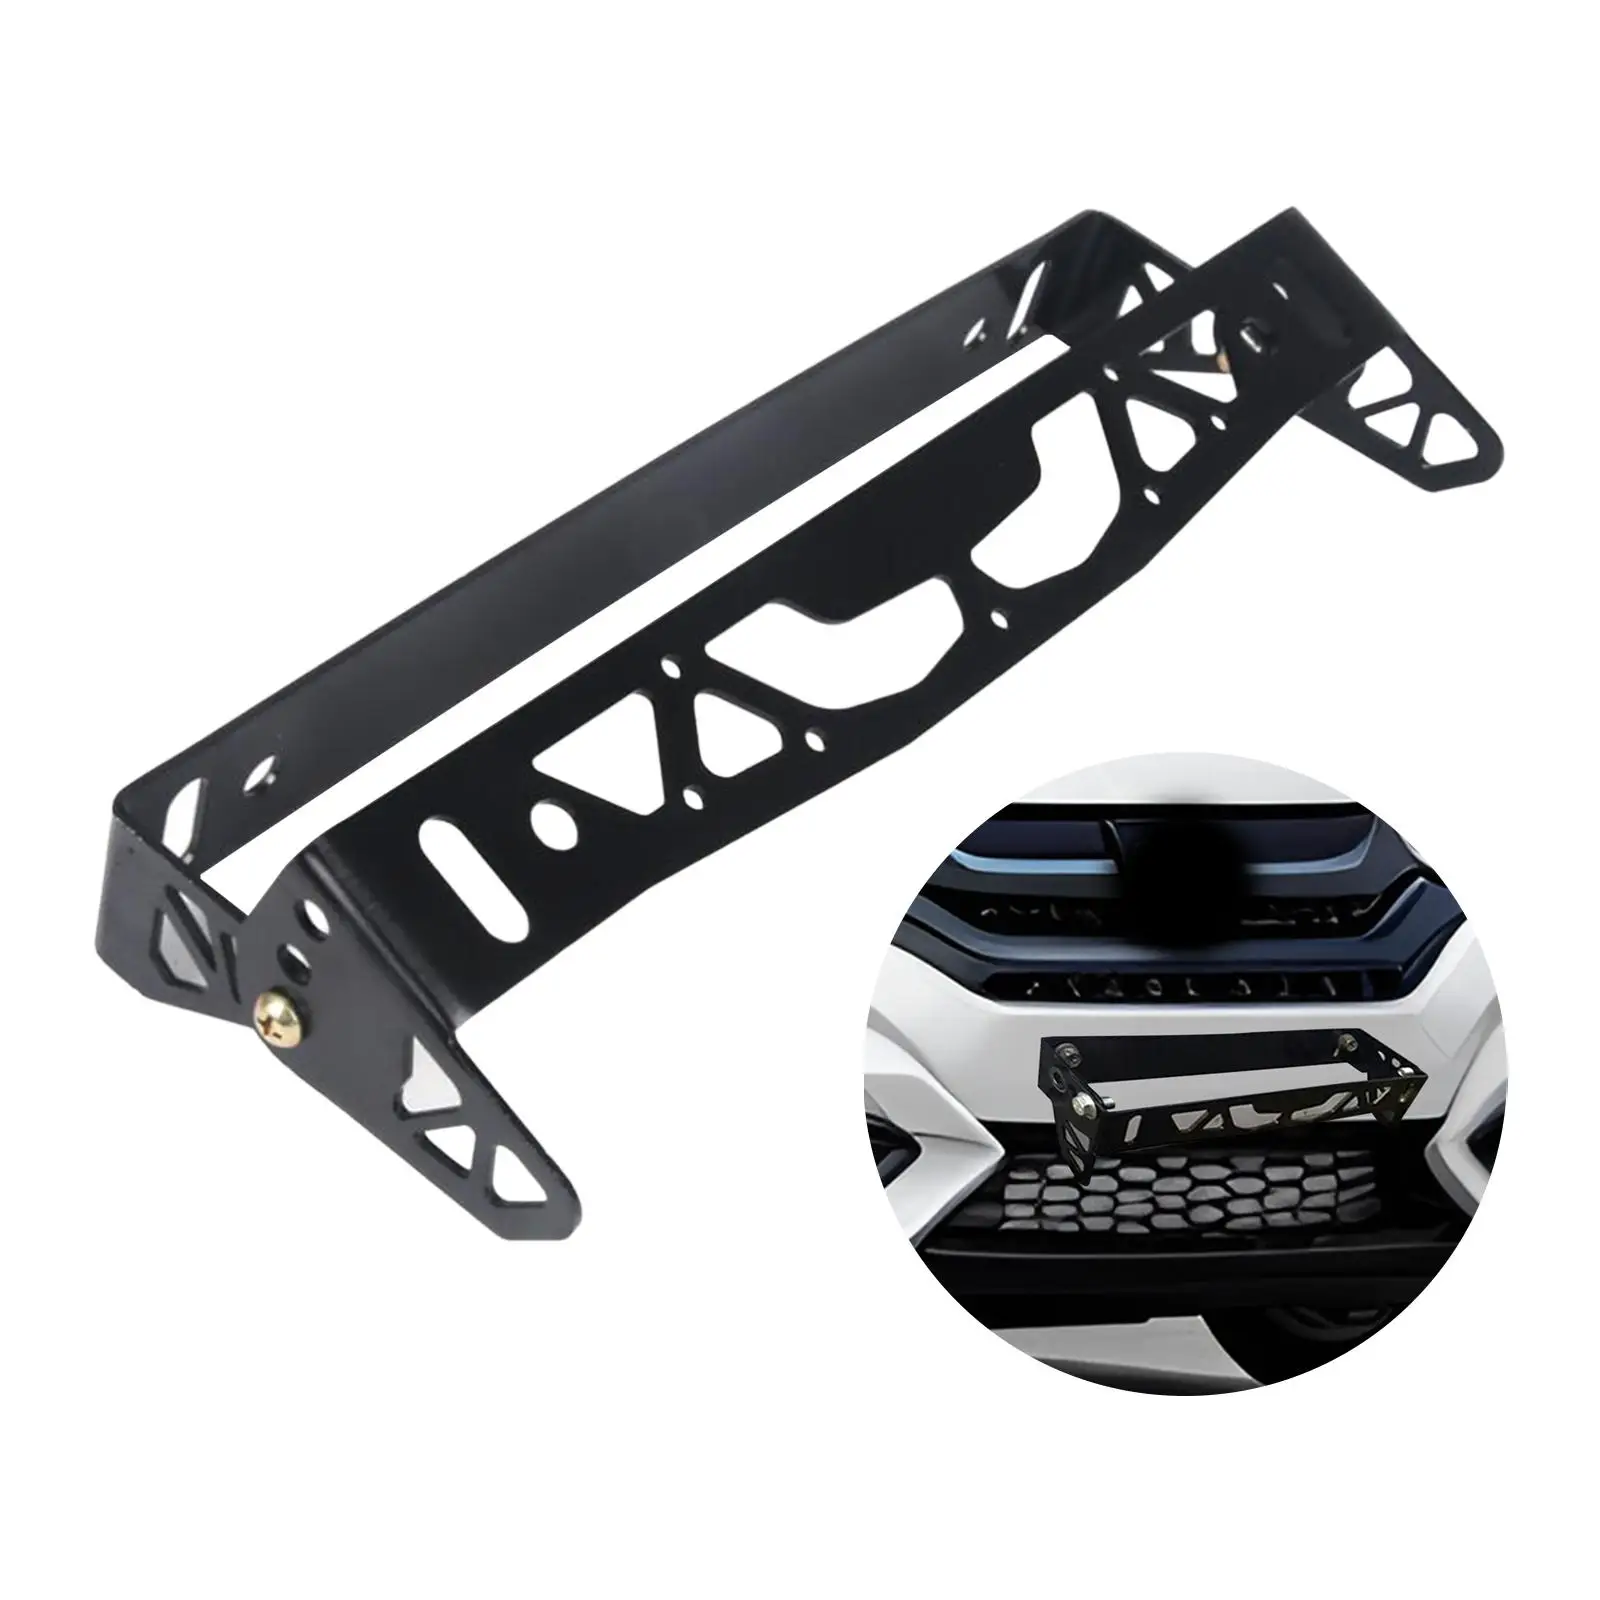 License Plate Frame Holder Auto Parts Aluminum Alloy Easy Installation Replaces Adjustable Car Front License Plate Mount